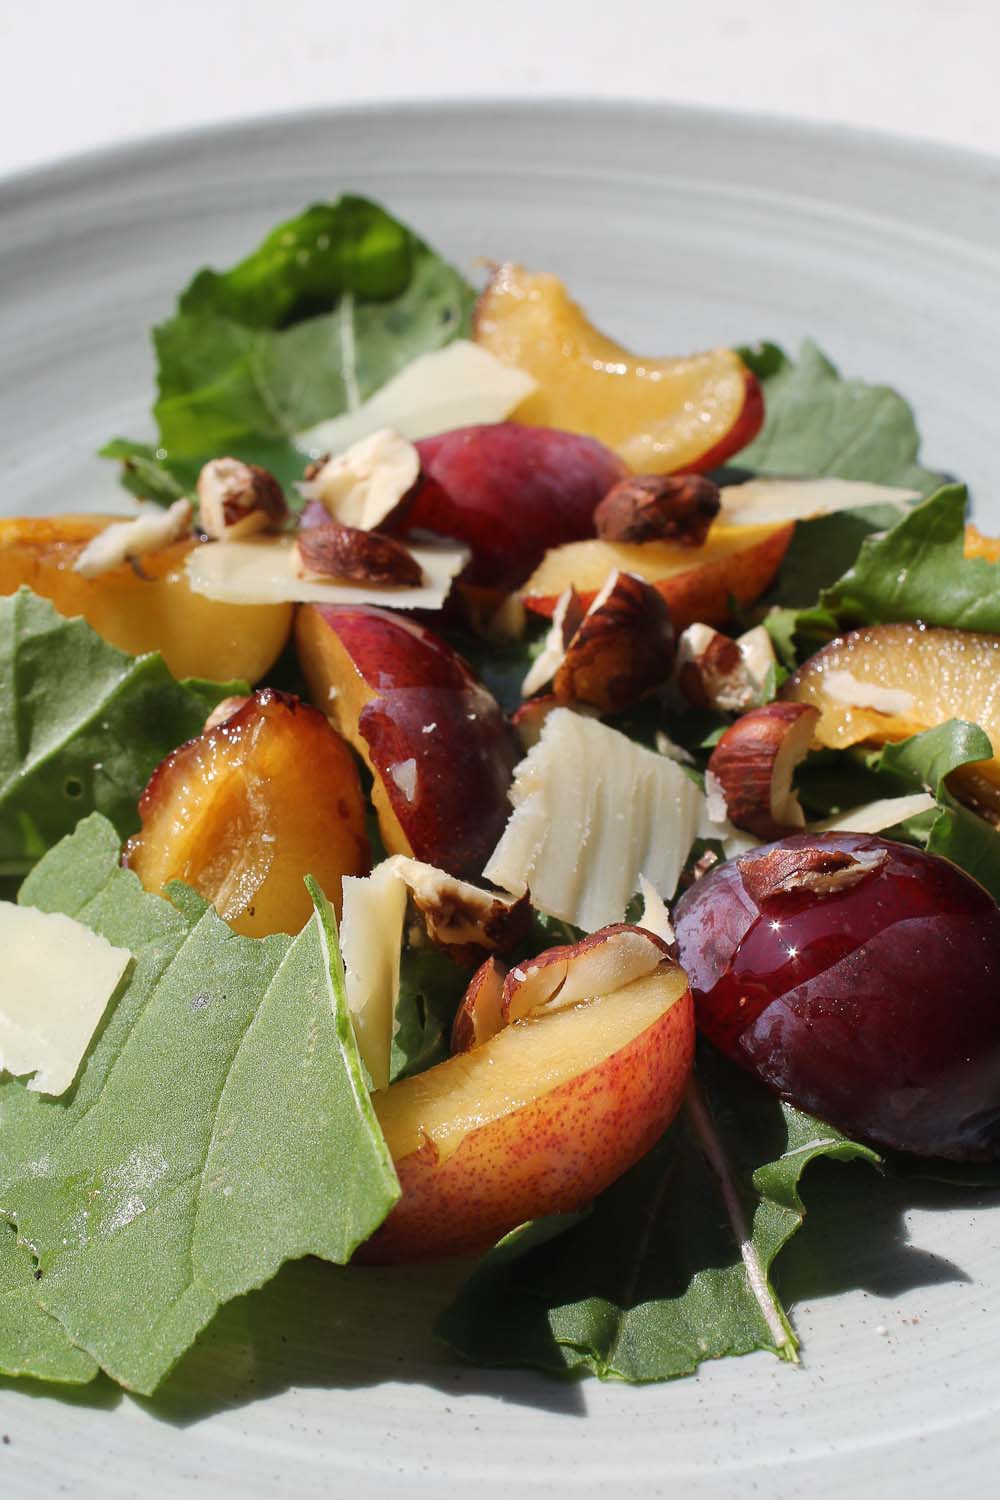 Salad with plums and arugula - Italian Notes